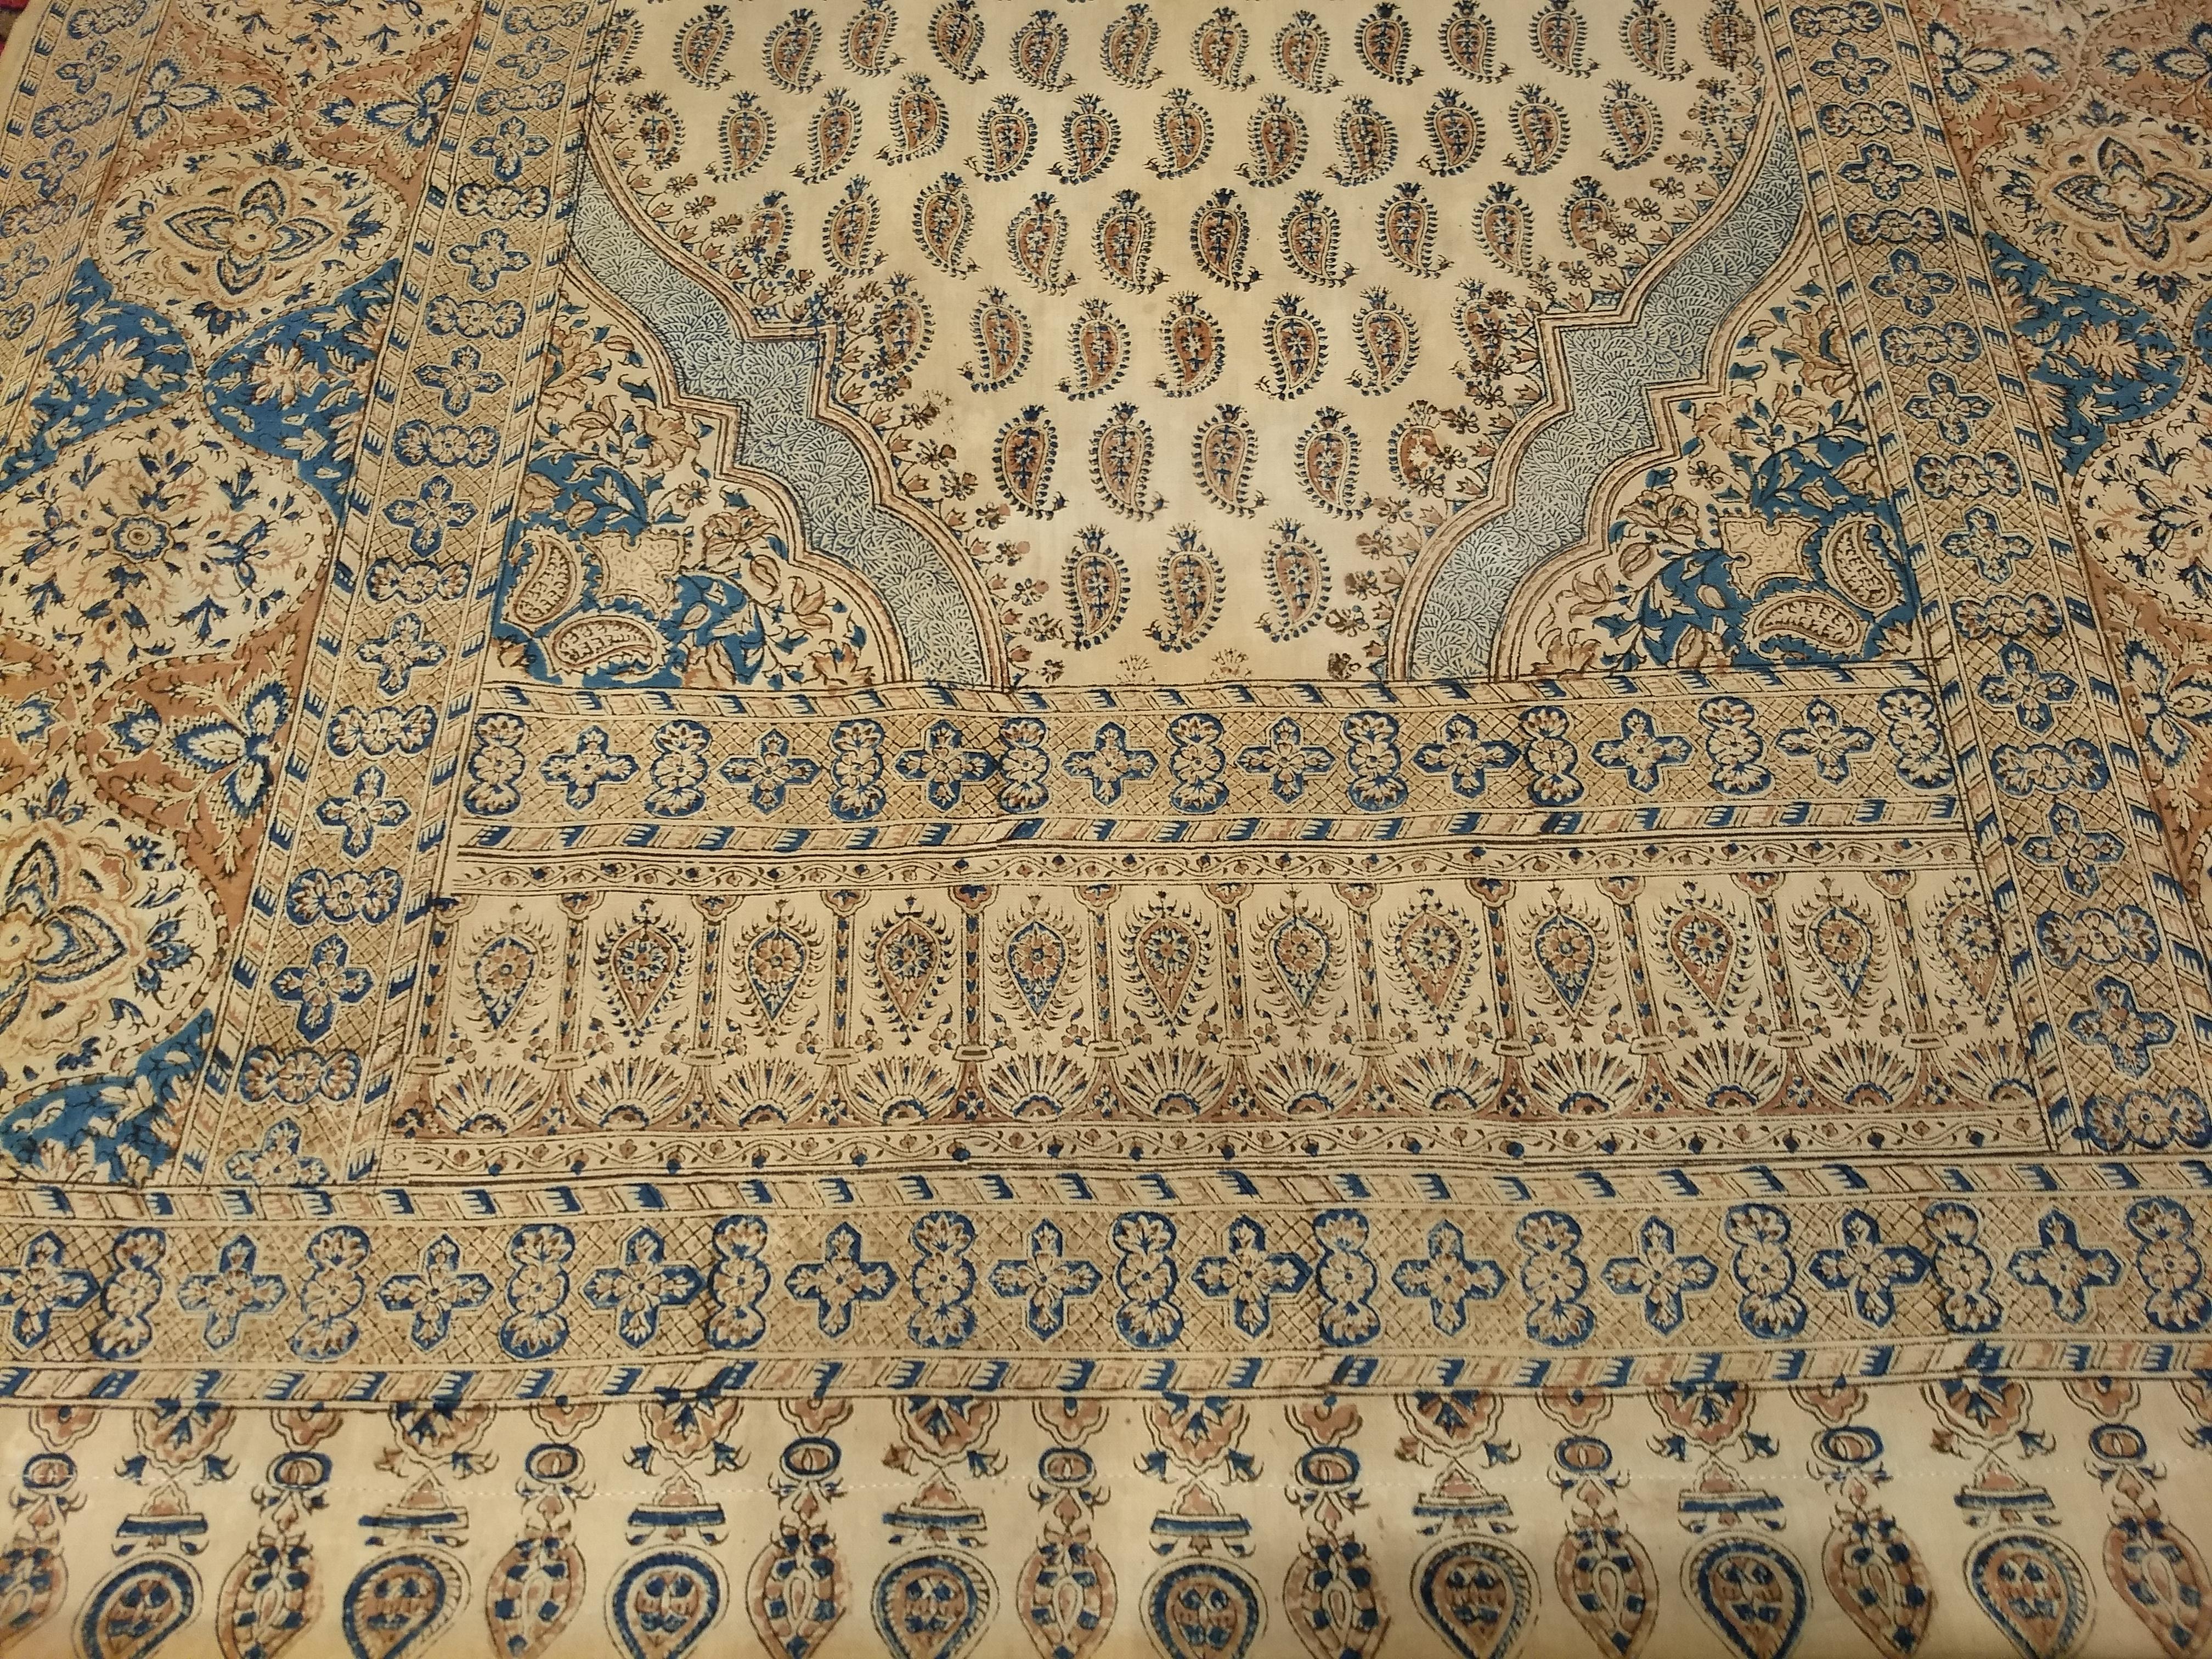 Vintage Persian Hand-Crafted Kalamkar Block Print Textile with a Paisley Pattern 7